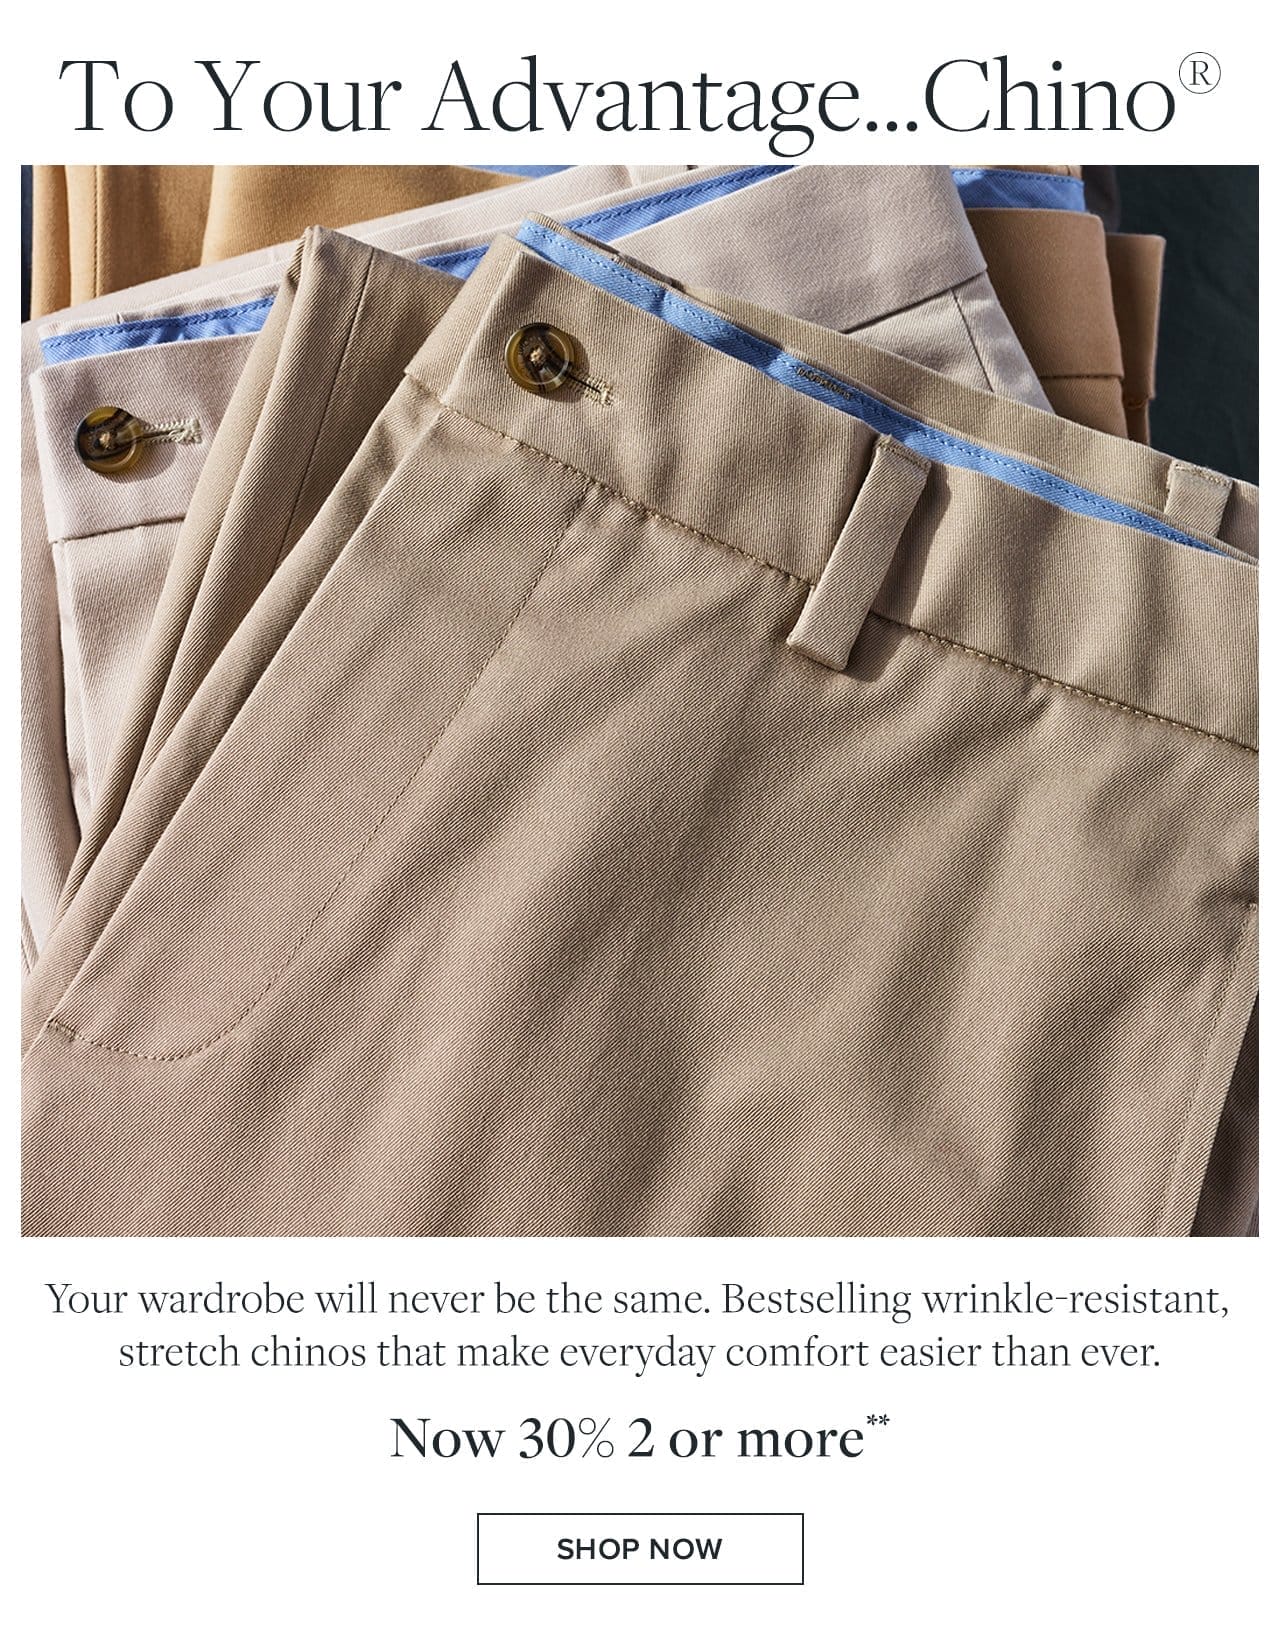 To Your Advantage... Chino Your wardrobe will never be the same. Bestselling wrinkle-resistant, stretch chinos that make everyday comfort easier than ever. Now 30% 2 or more Shop Now